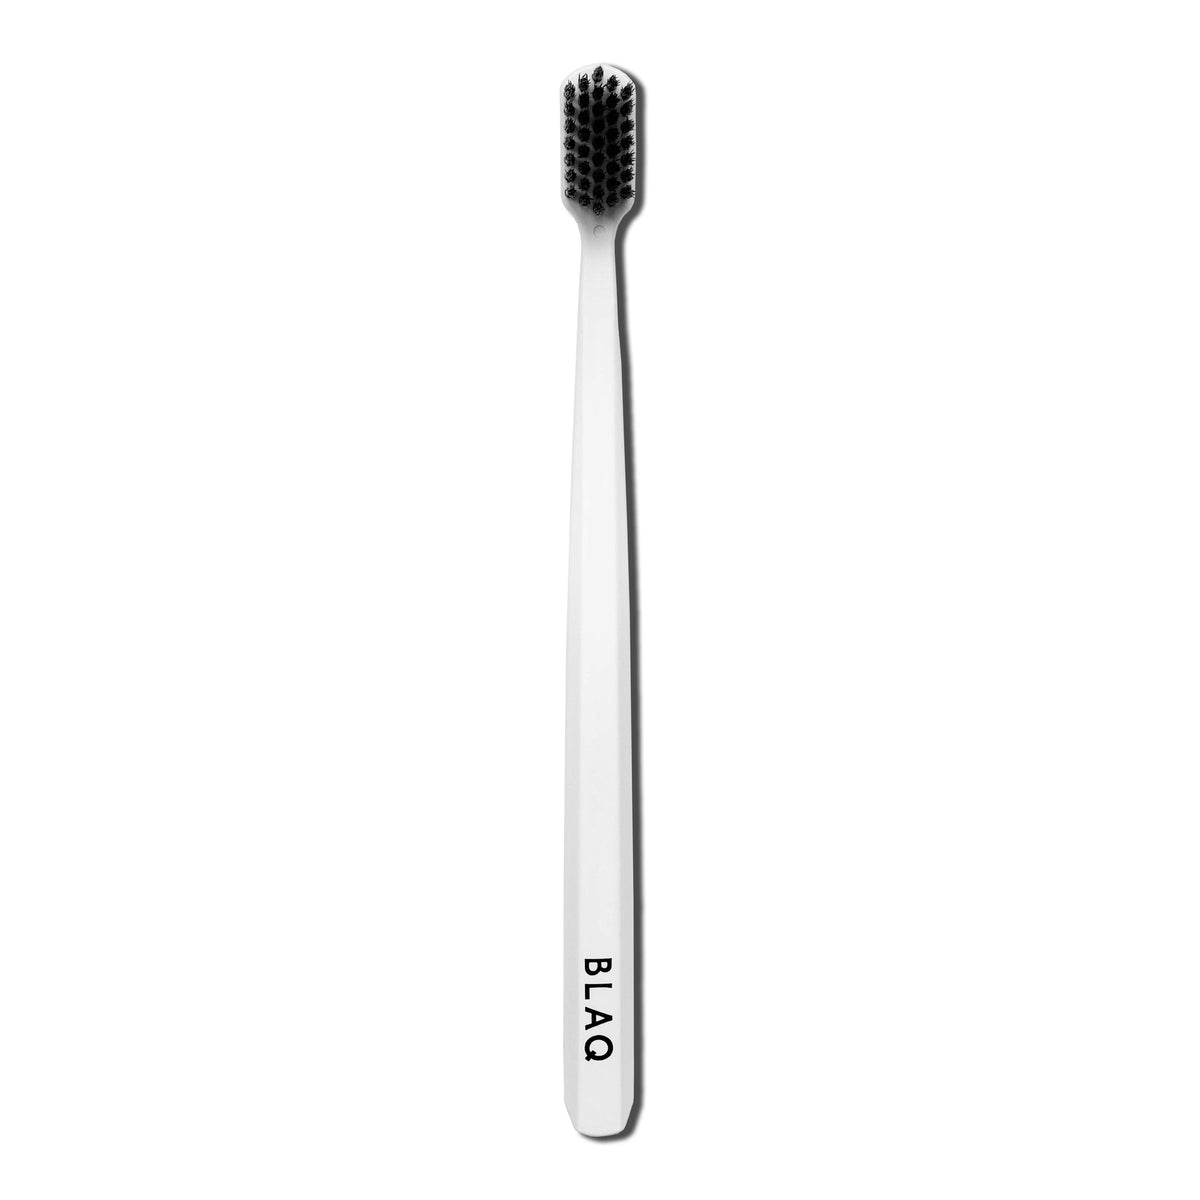 Charcoal-Infused Biodegradable Toothbrush